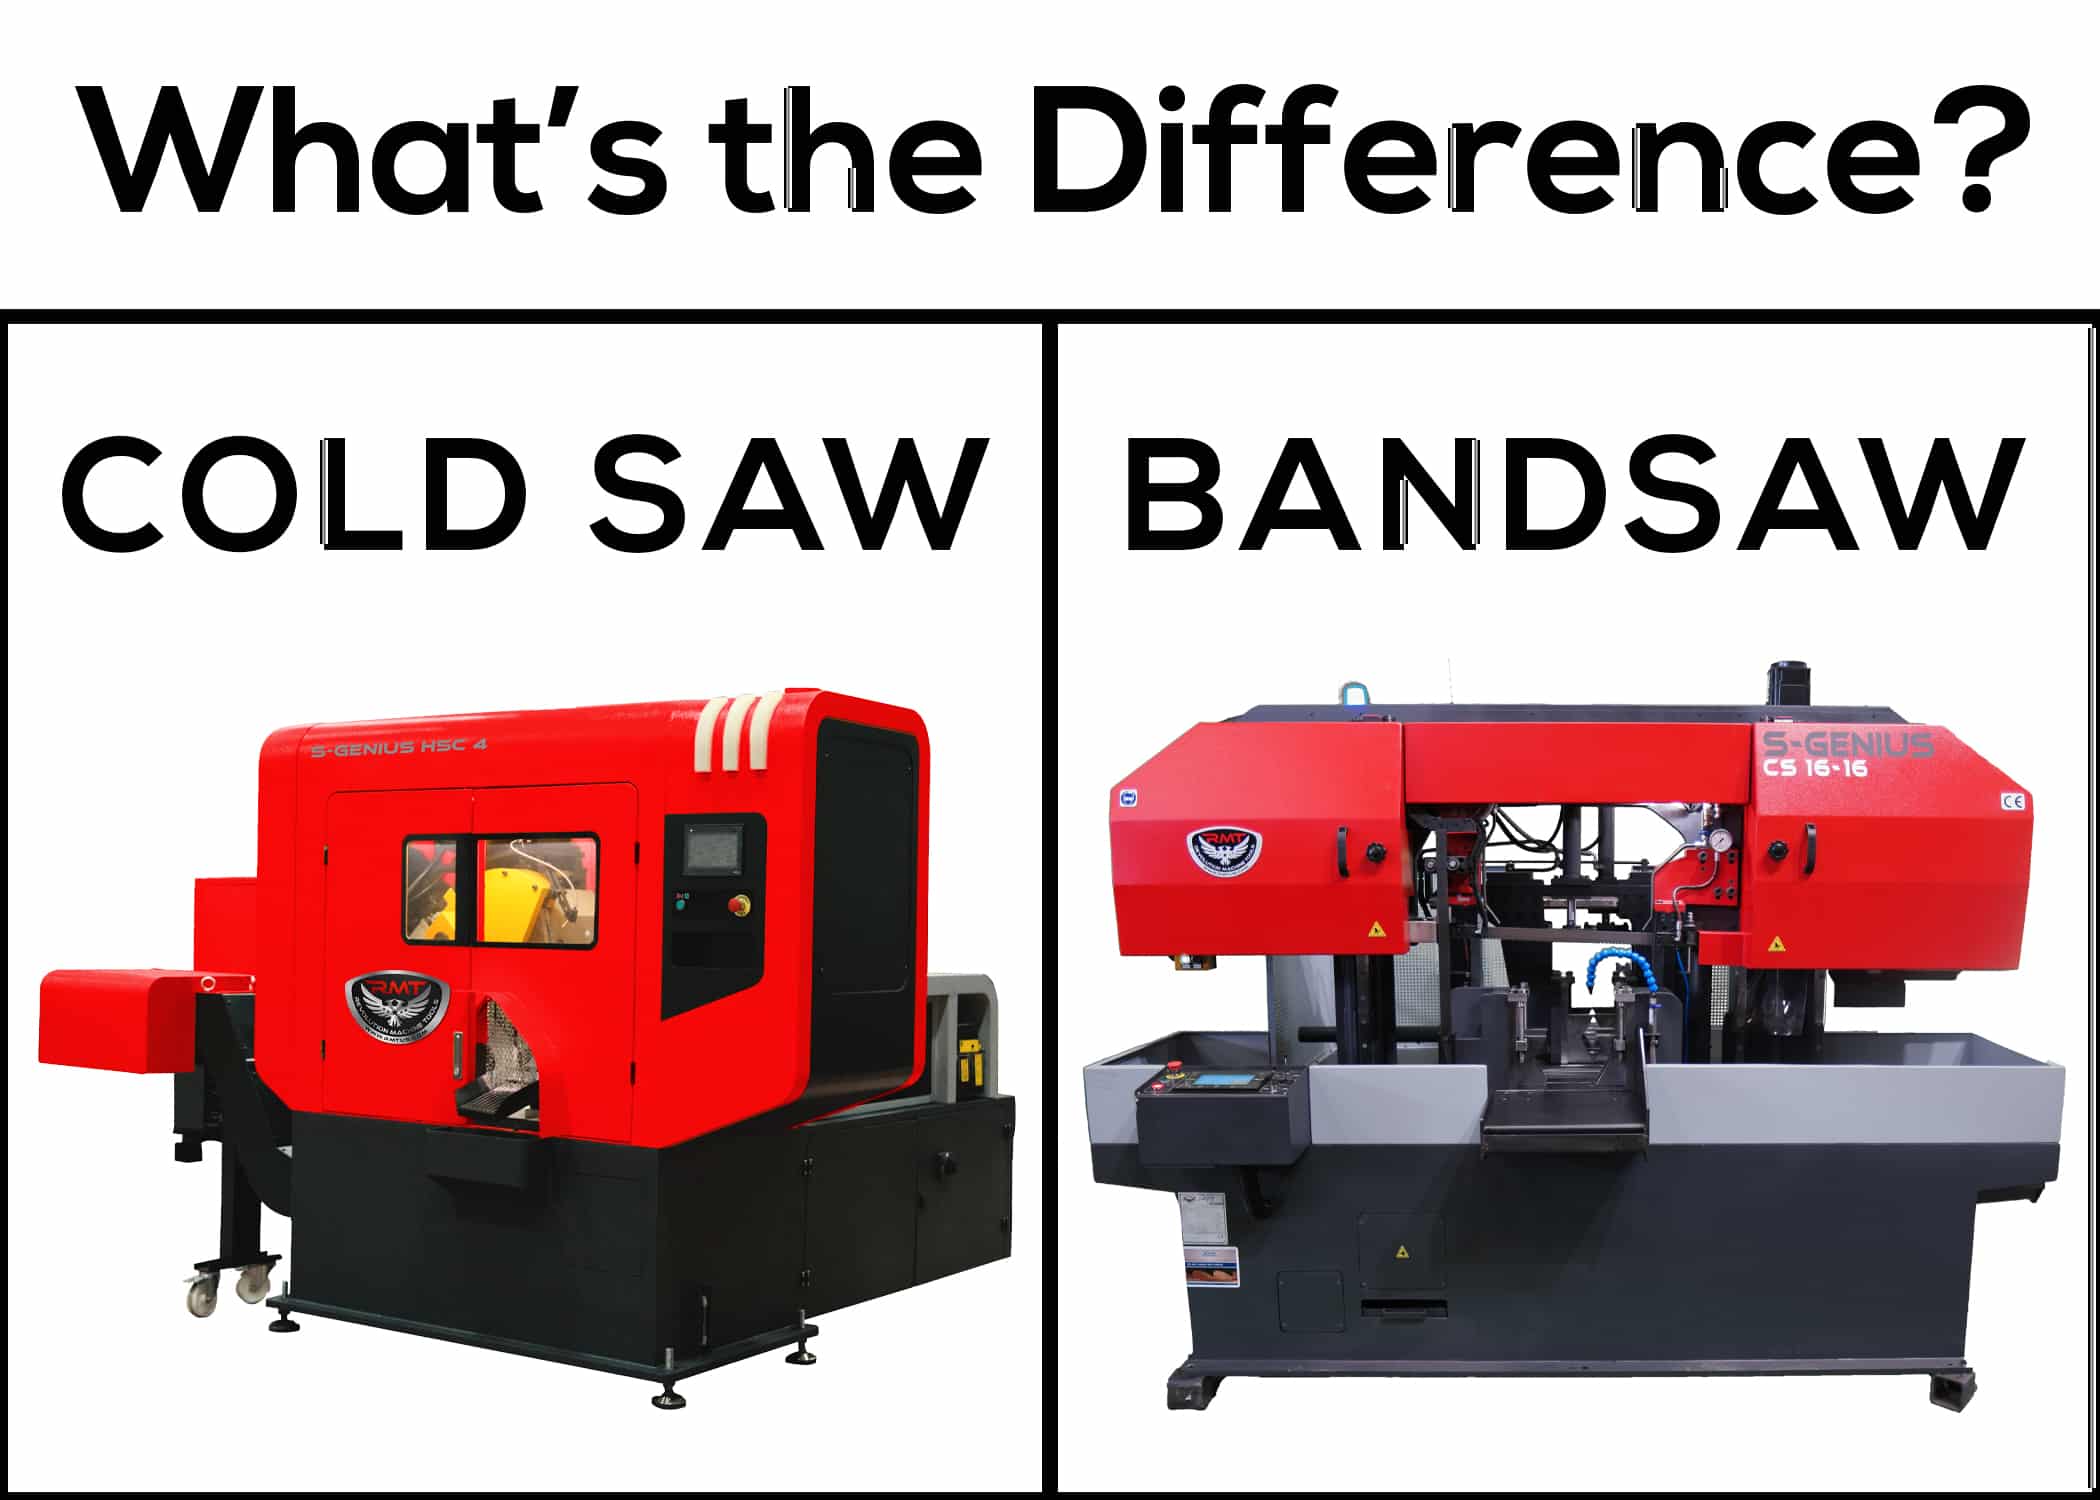 Cold Saw and Bandsaw Difference